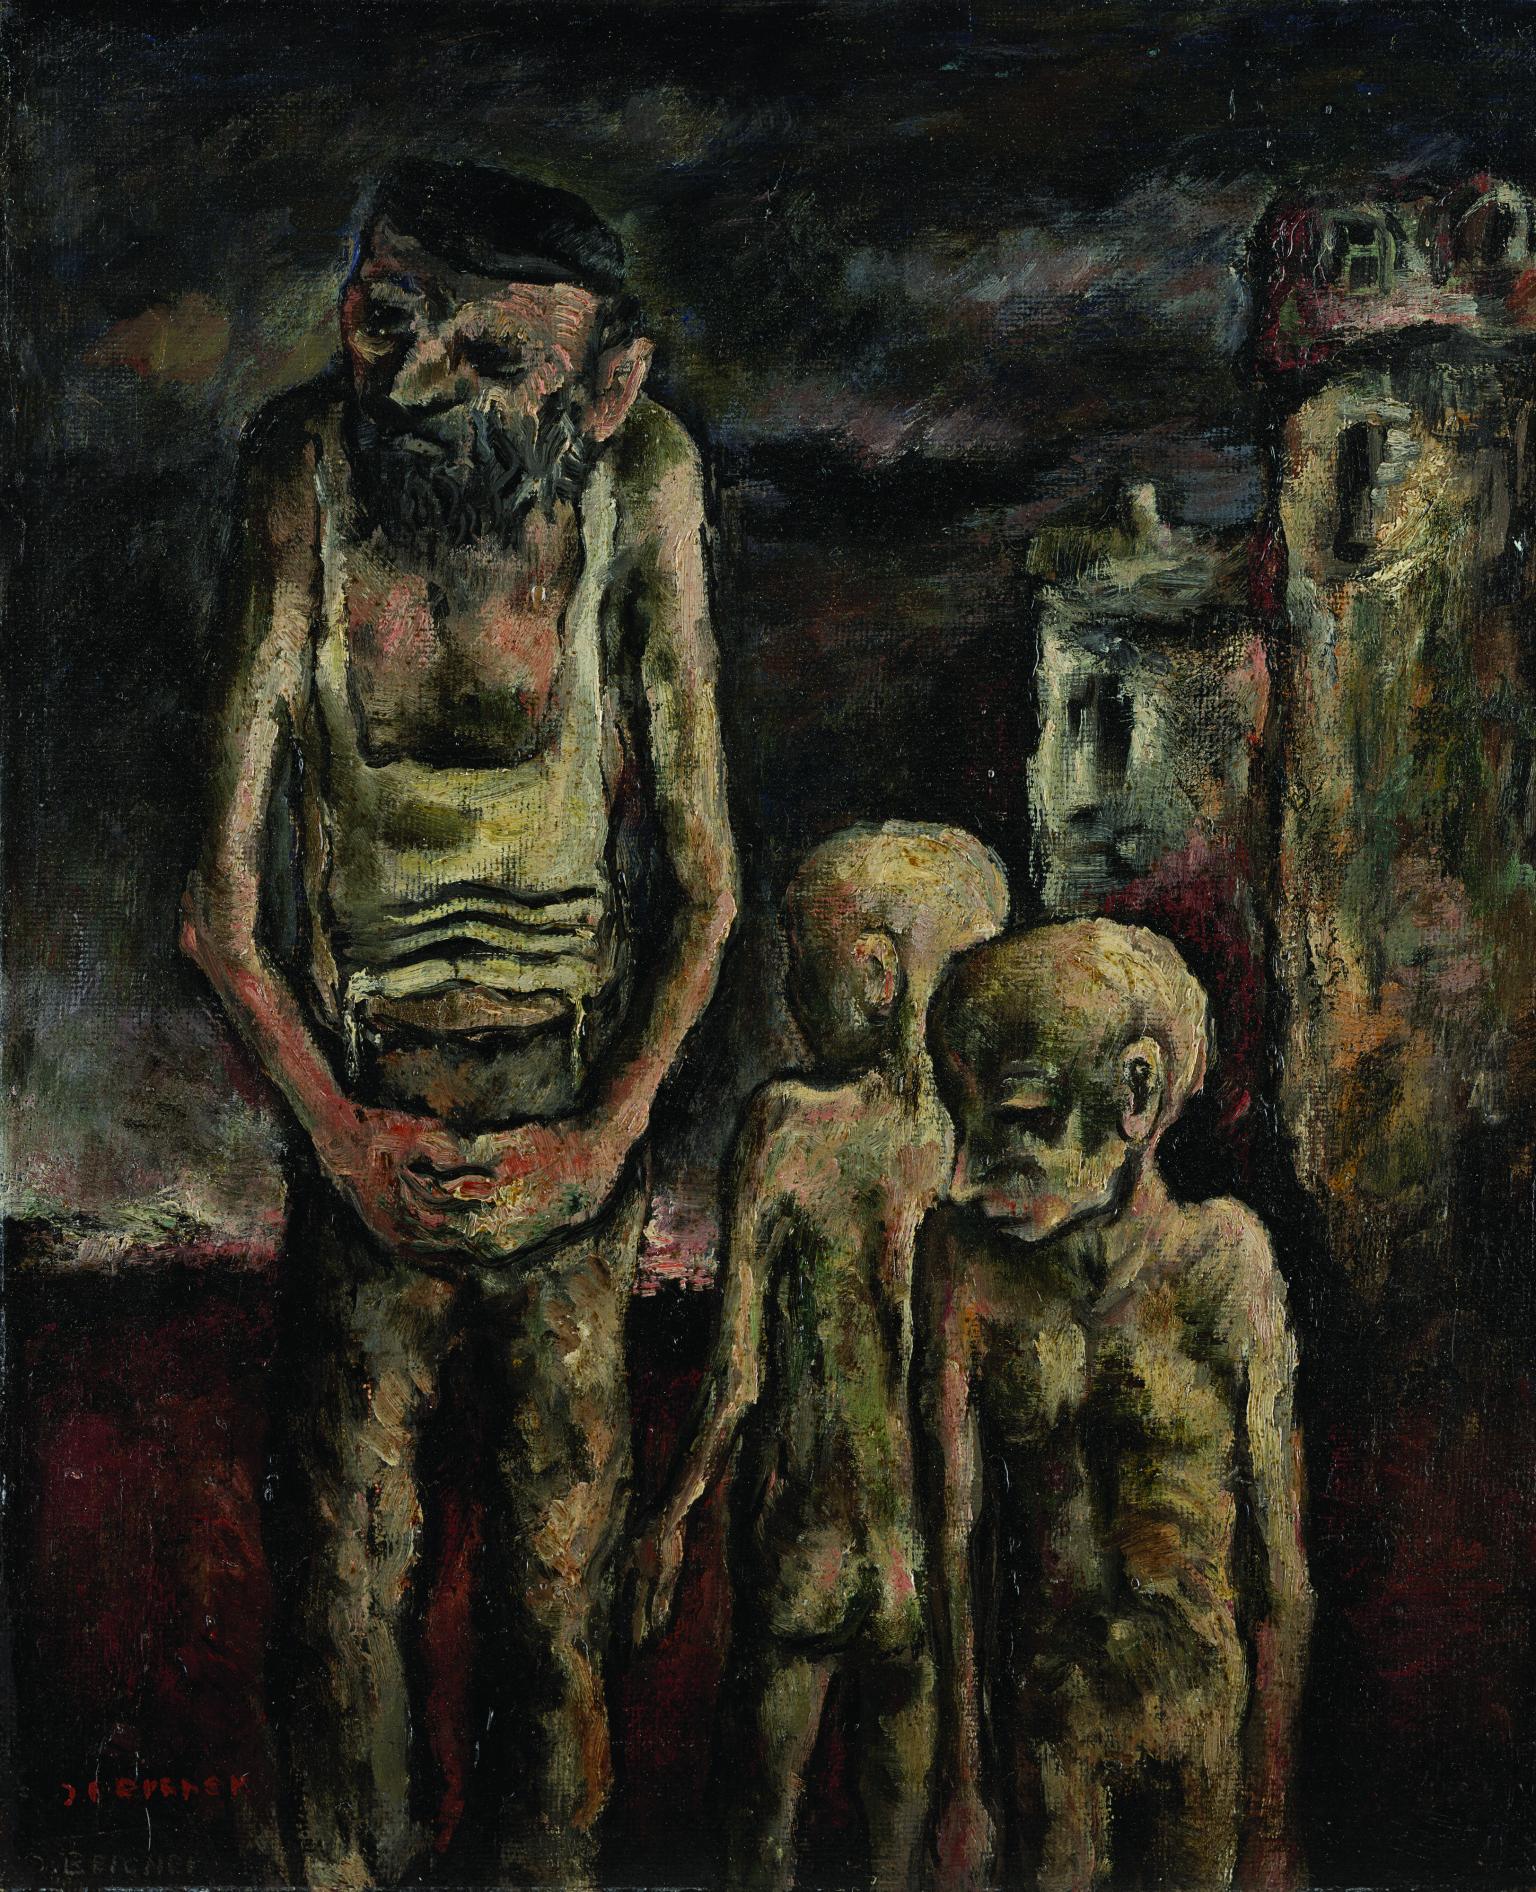 Painting of emaciated father with beard gazing to his right while his two nude and emaciated young sons stand next to him. Background is dark.